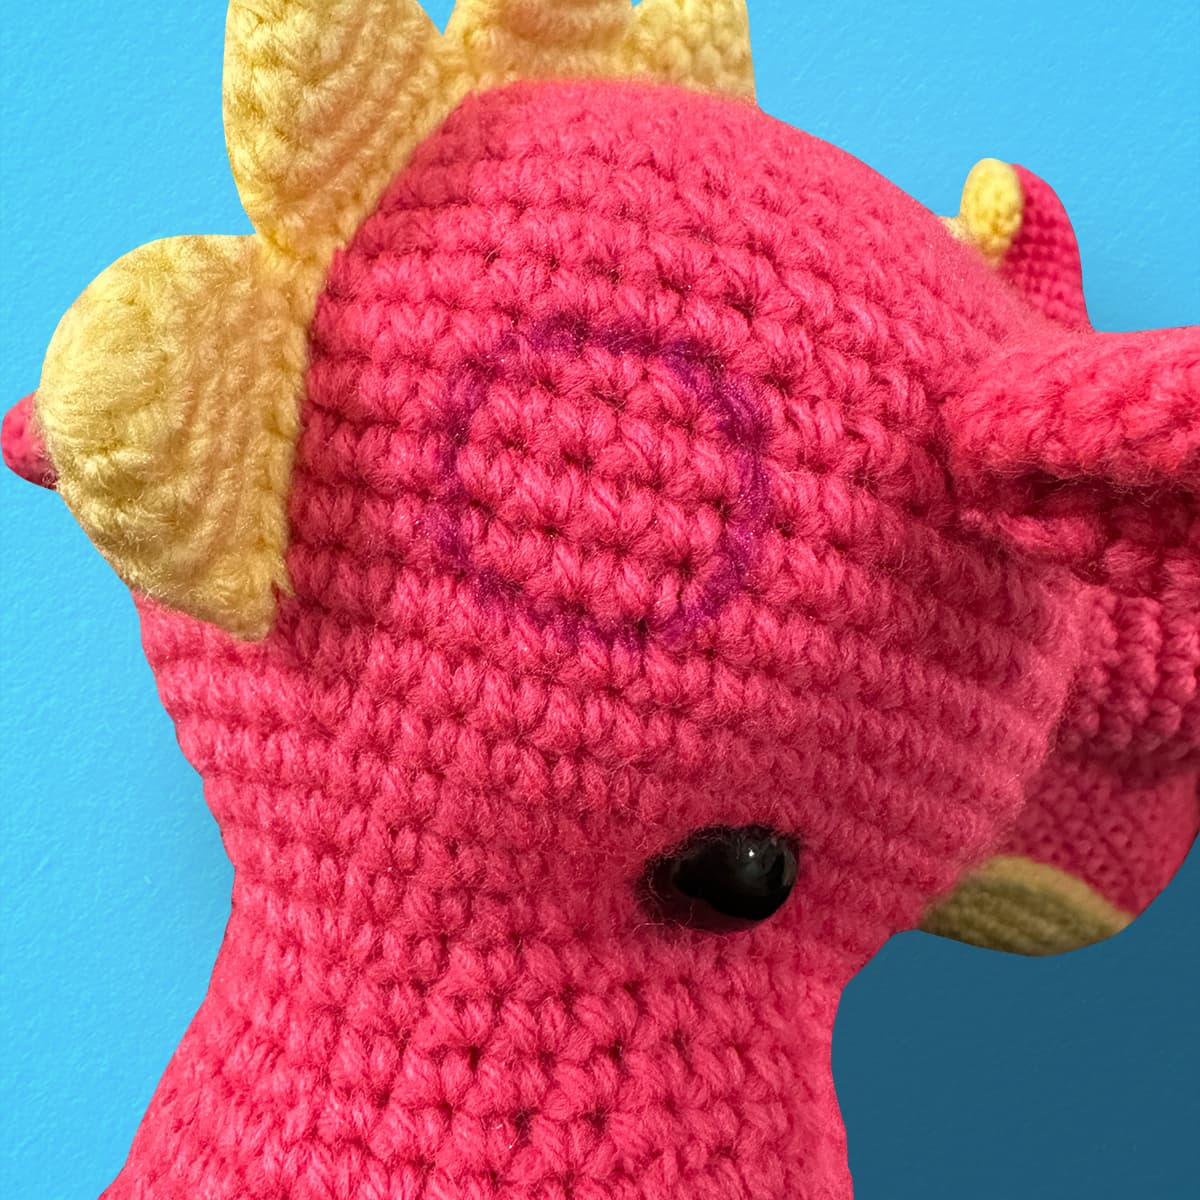 Crochet Dragon Tutorial (Photo 4 - Where to Place the Horns)